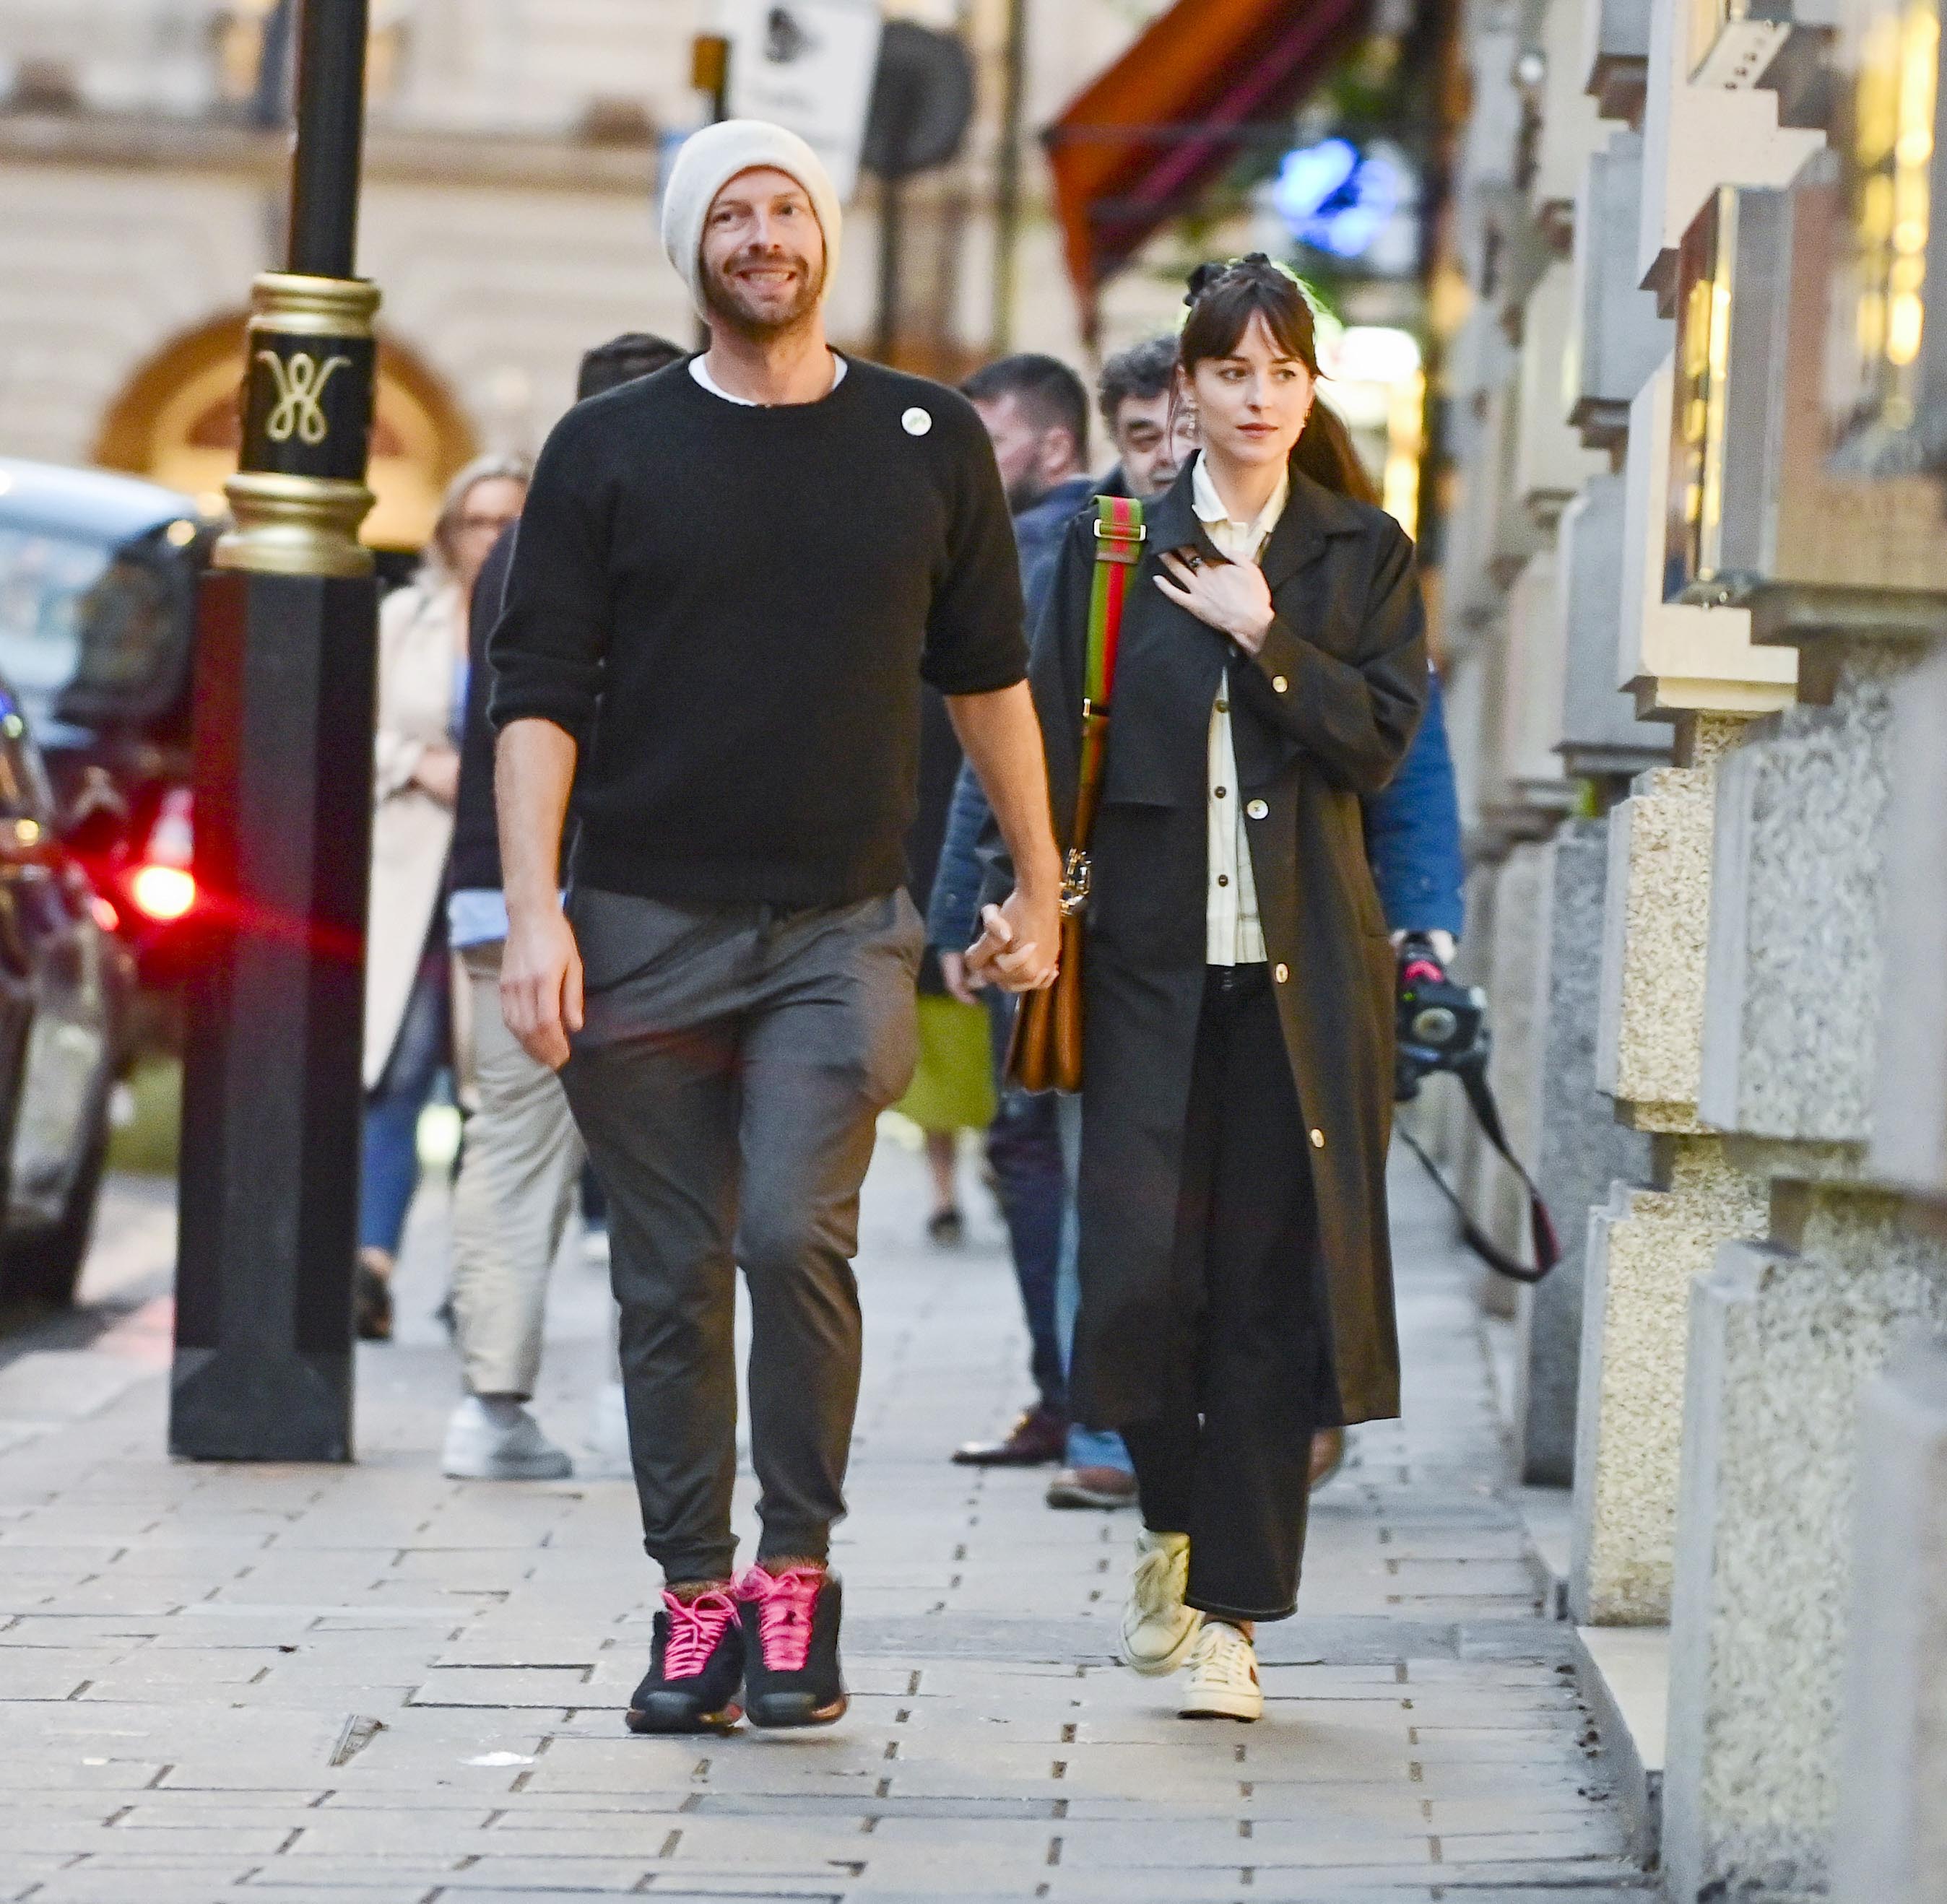 romantic walk  Chris Martin and Dakota Johnson walked the streets of London and shopped at exclusive venues.  They were photographed while walking hand in hand before entering an exclusive restaurant to eat